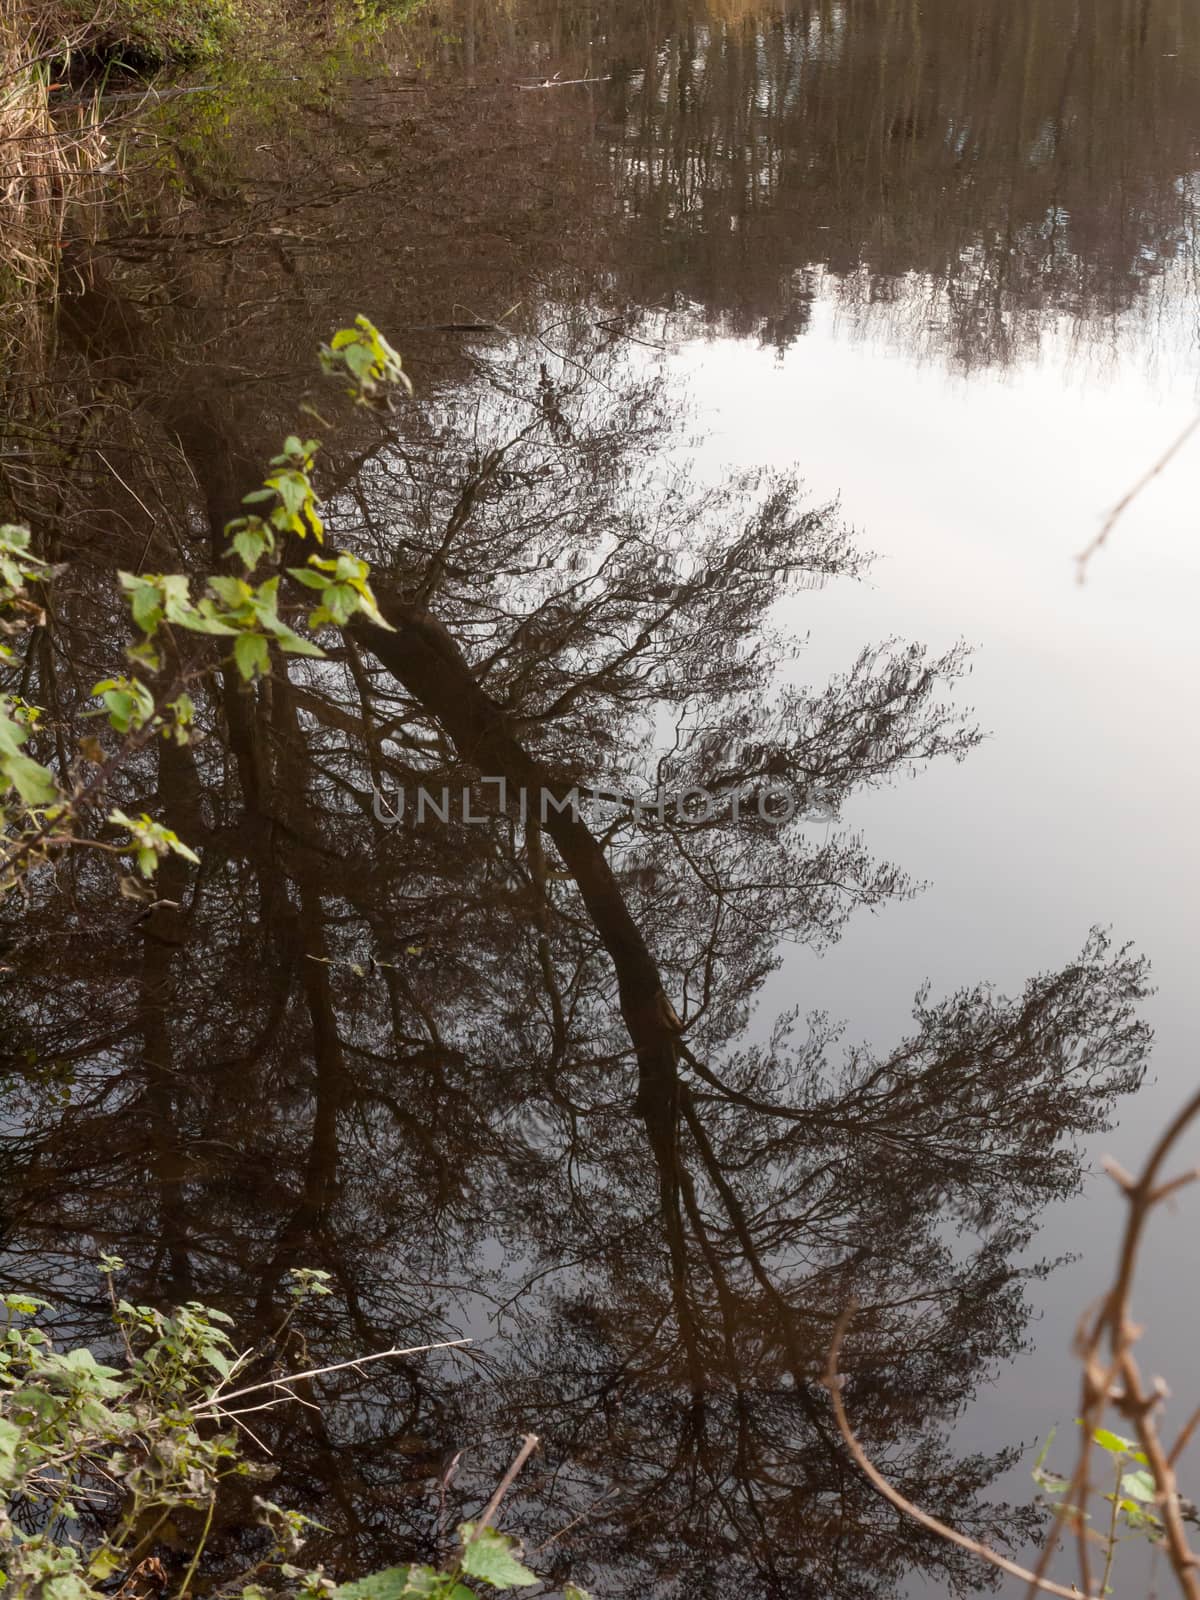 reflection of tree branch in water lake surface background by callumrc